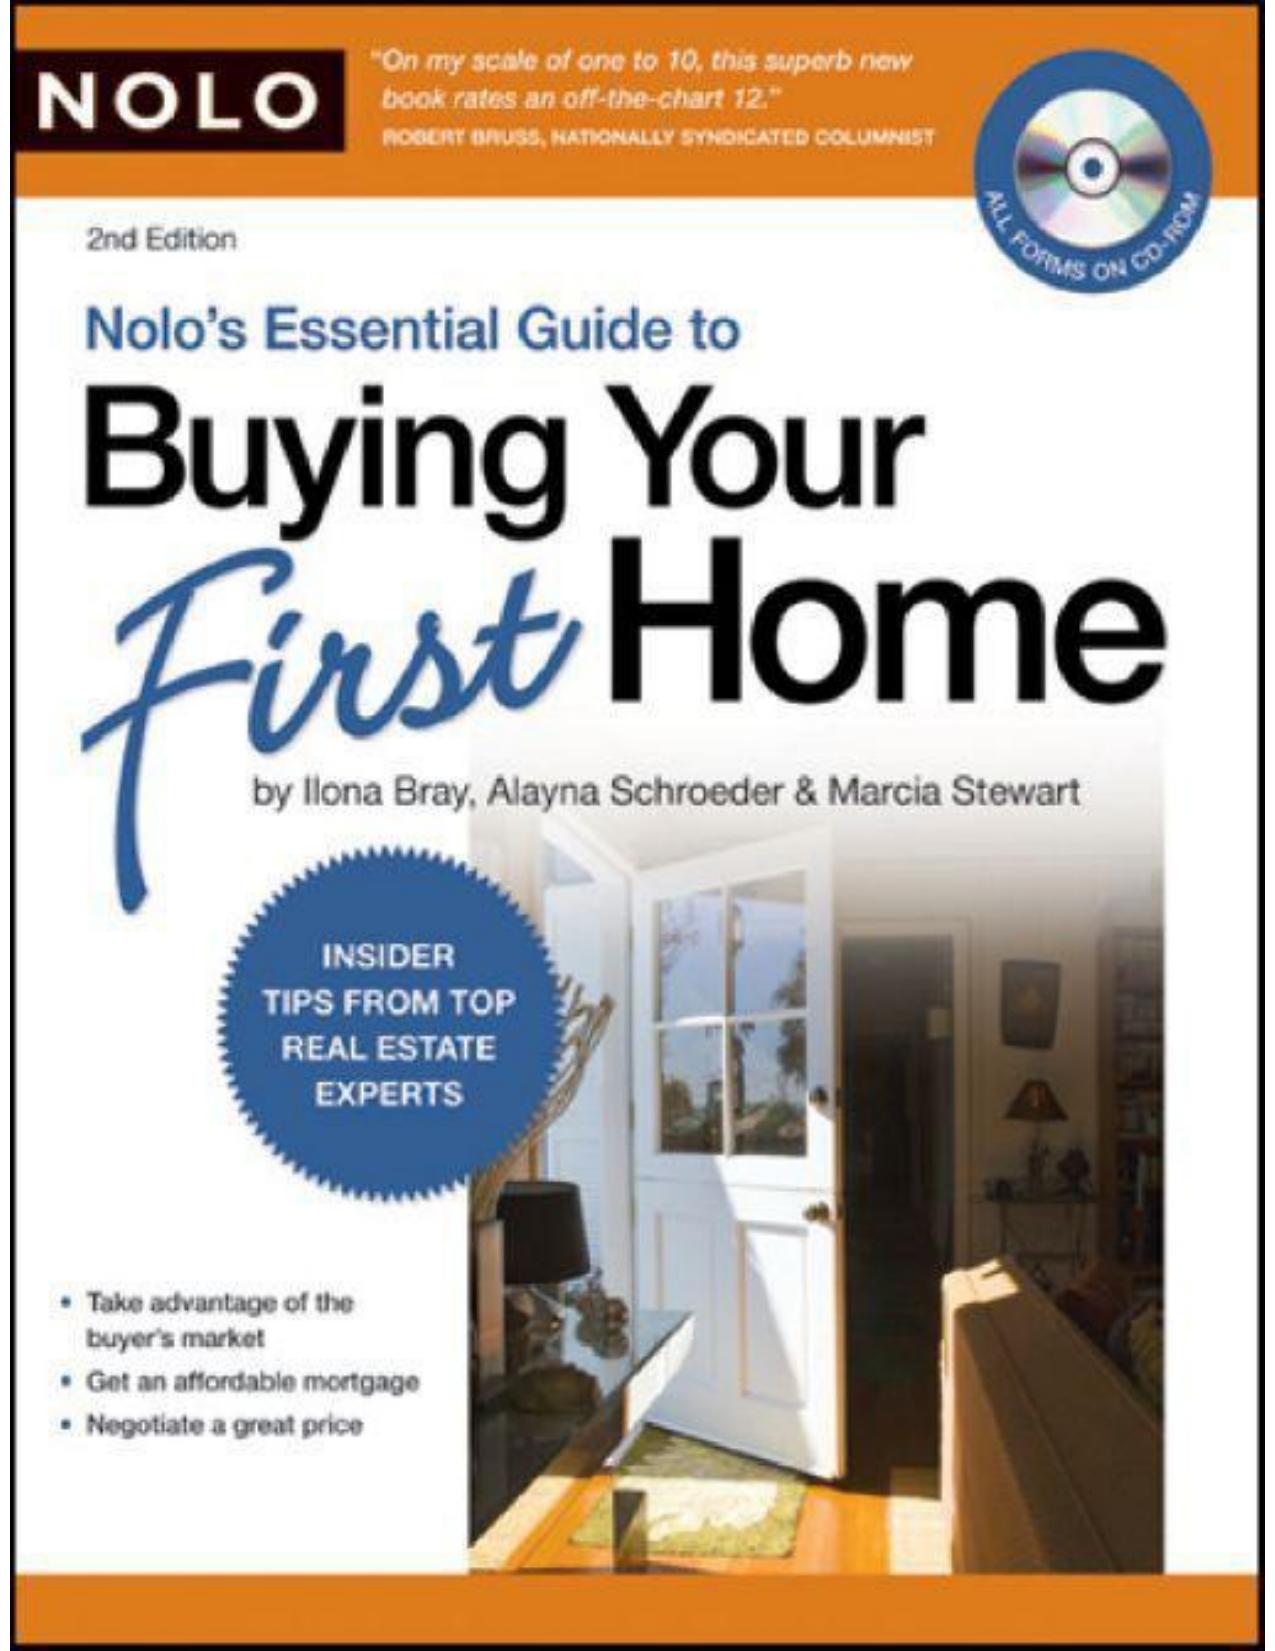 Nolo's Essential Guide to Buying Your First Home by Ilona Bray & Alayna Schroeder & Marcia Stewart